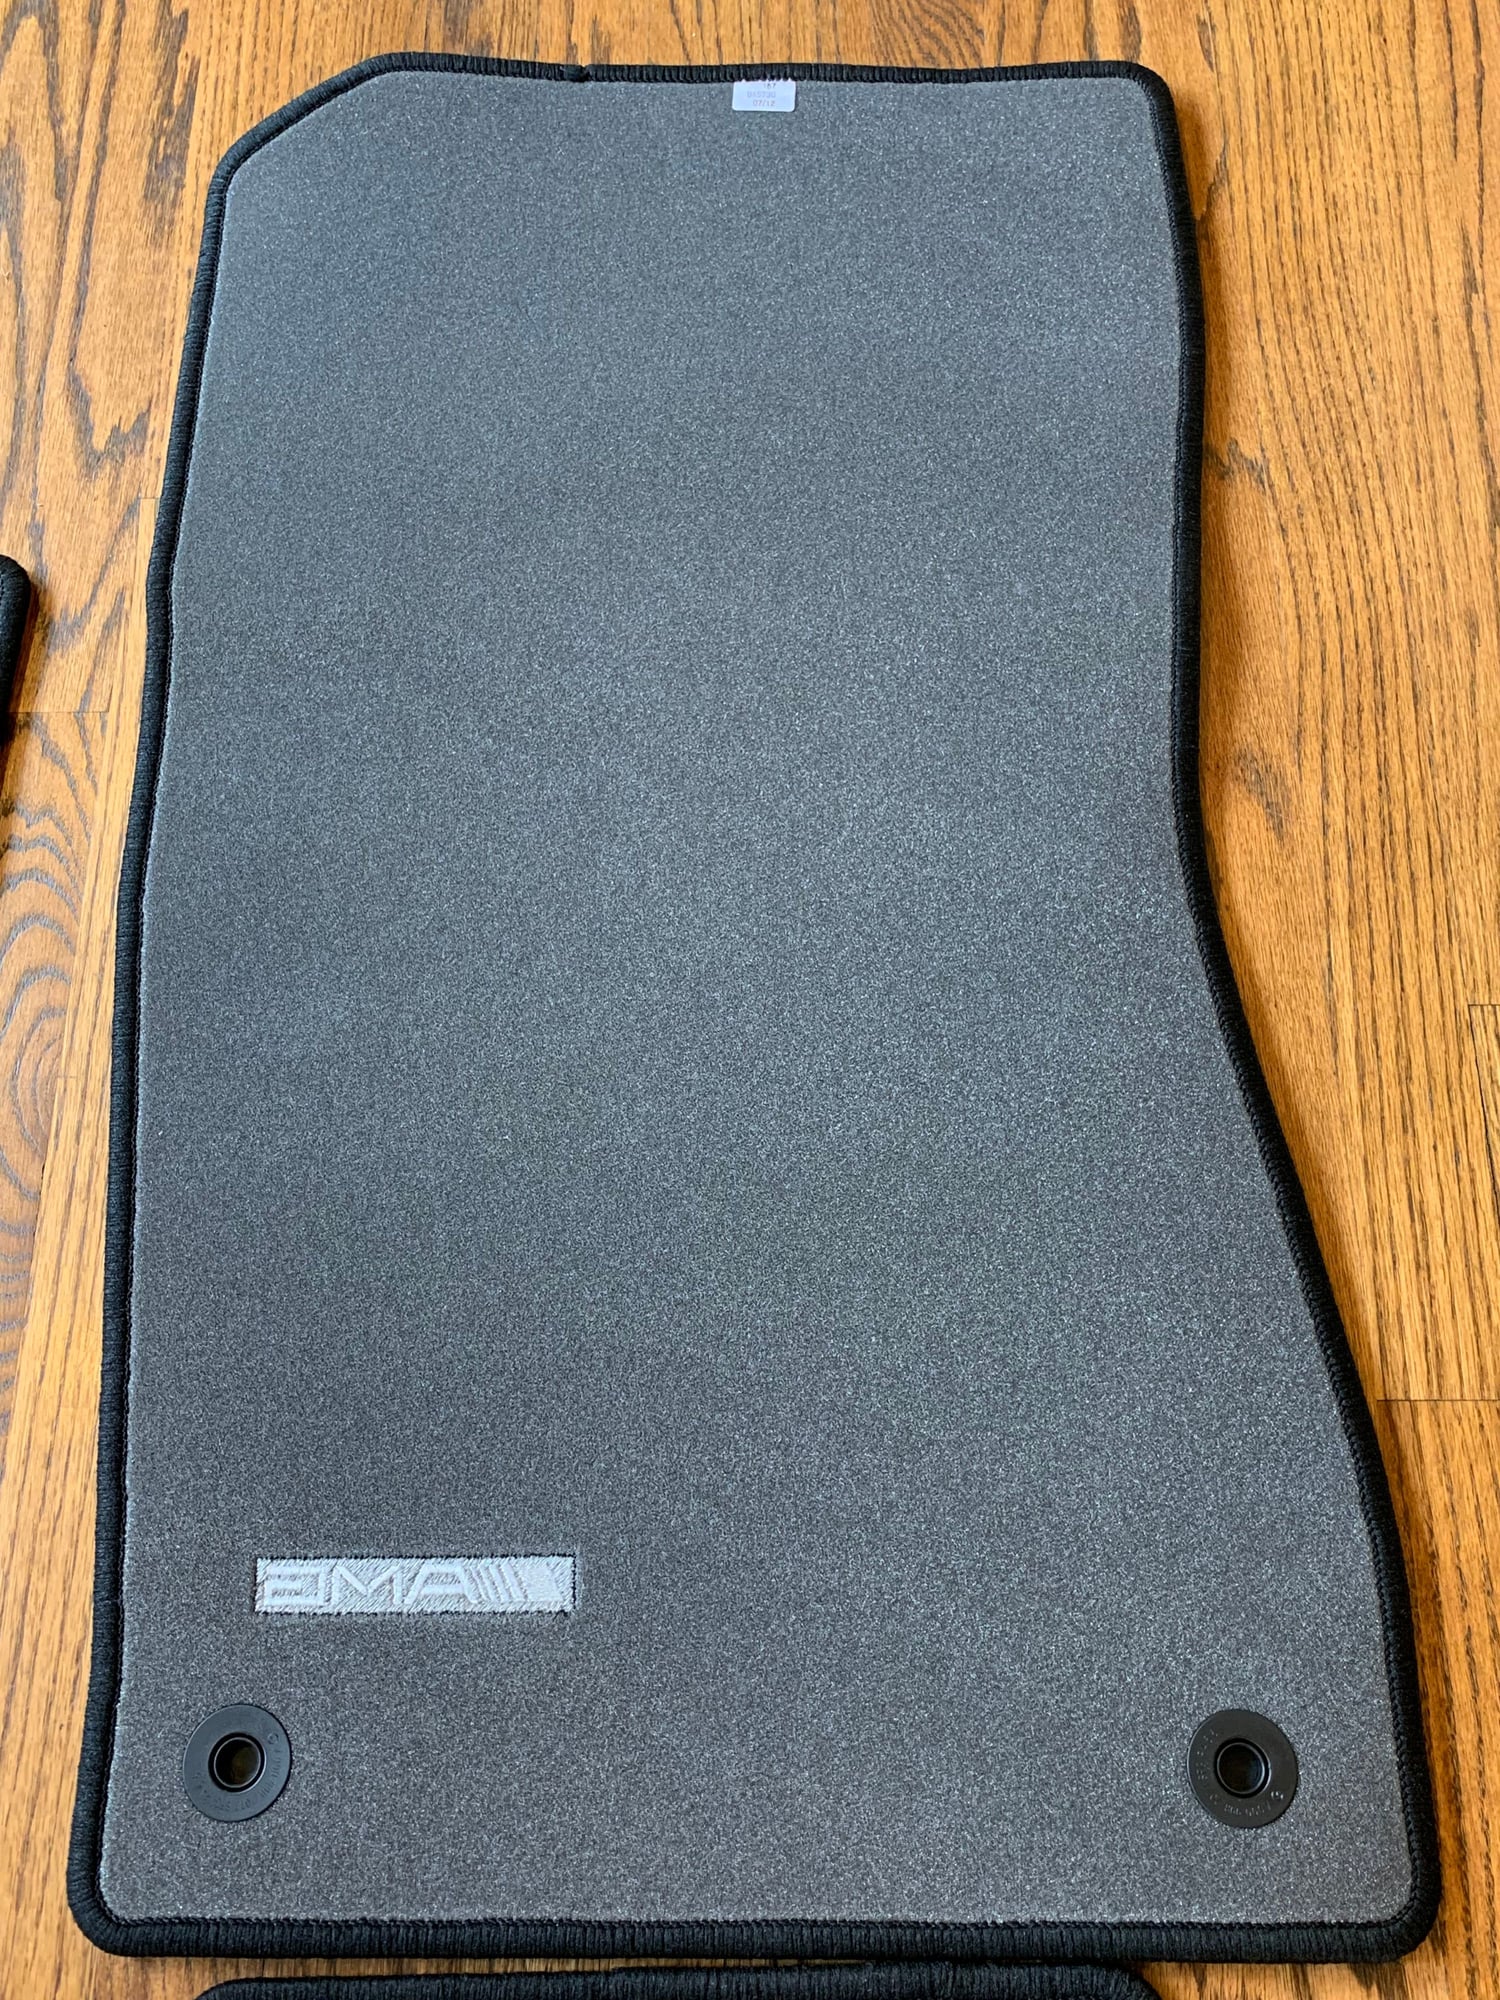 Interior/Upholstery - FS: W219 Genuine Mercedes AMG Floor Mats in near-new condition, black color. - Used - 2004 to 2010 Mercedes-Benz CLS500 - 2006 to 2010 Mercedes-Benz CLS550 - 2004 to 2006 Mercedes-Benz CLS55 AMG - 2006 to 2010 Mercedes-Benz CLS63 AMG - Cramerton, NC 28032, United States